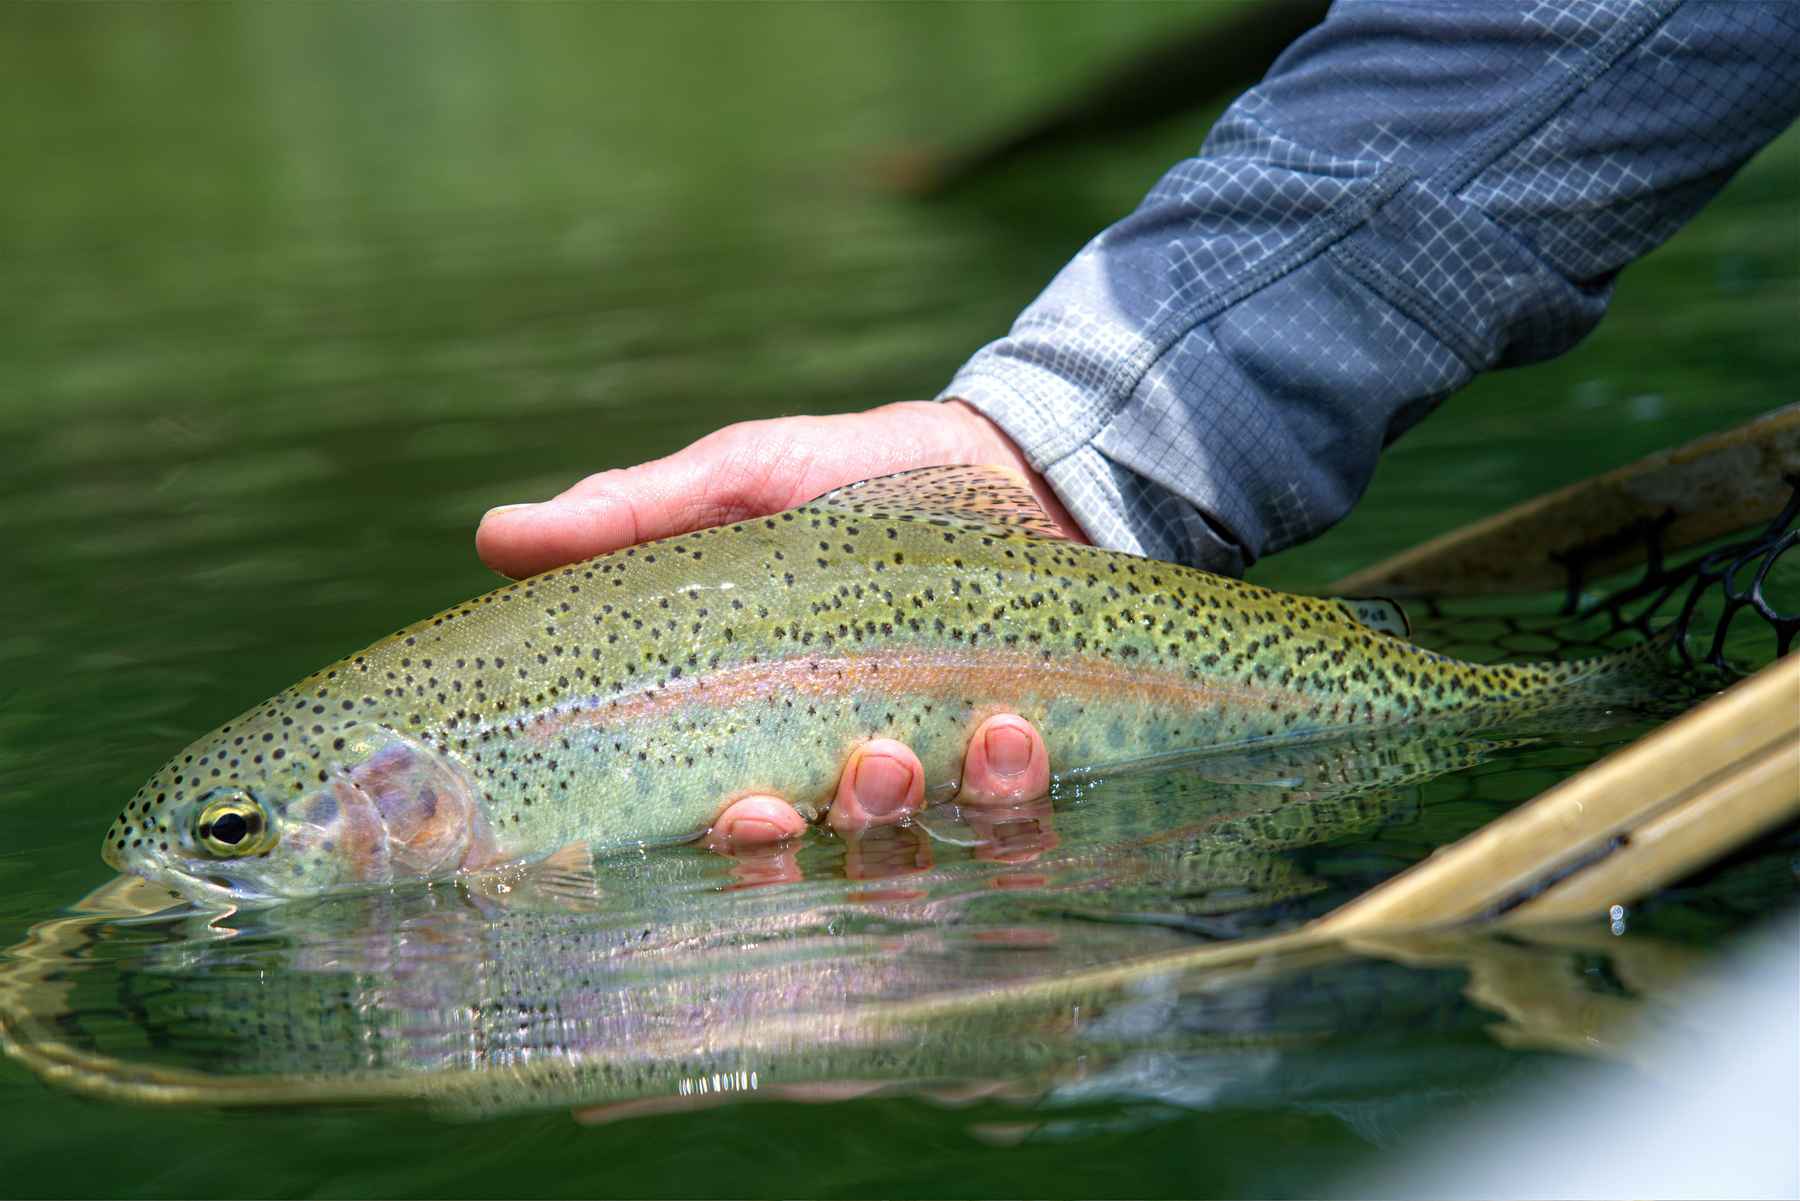 How To Hold A Trout For Photos (Trout Photo Tips) - Fly Fishing Fix